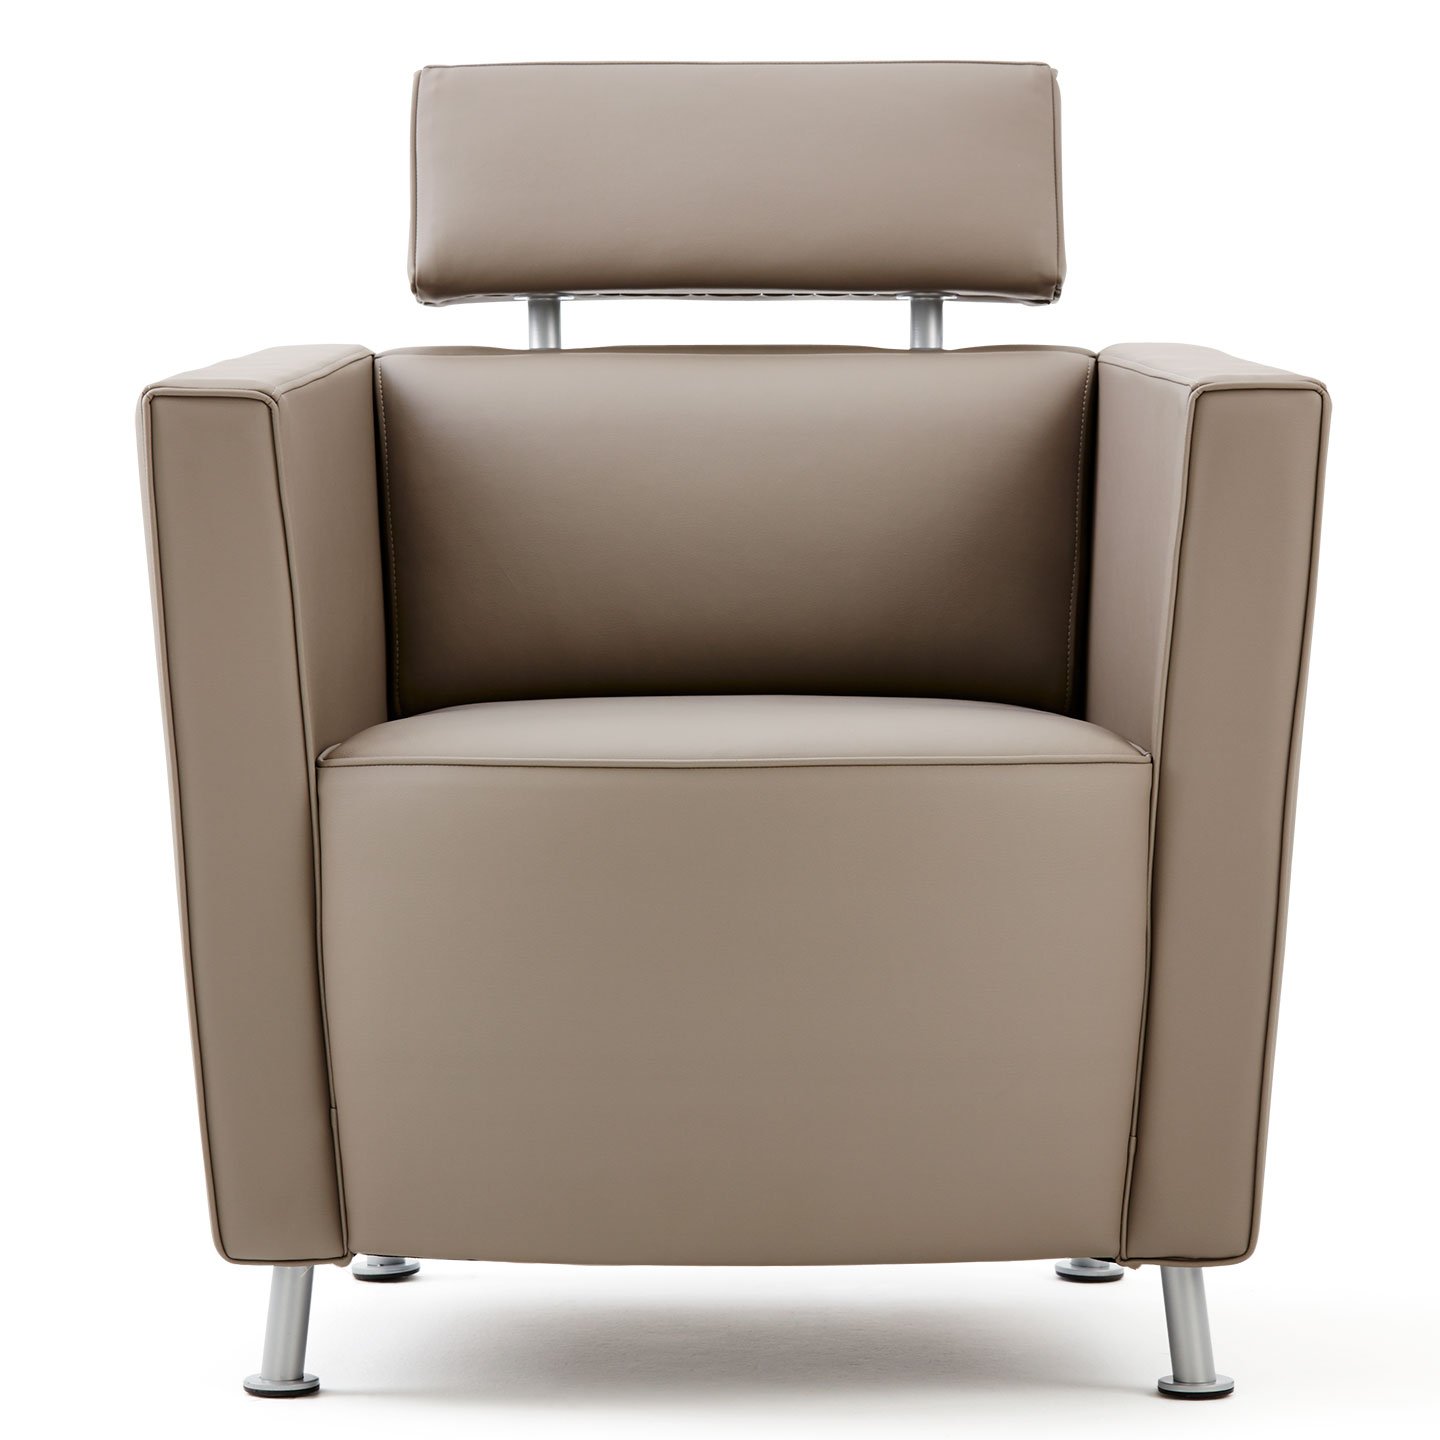 Haworth Hello lounge in grey leather front view